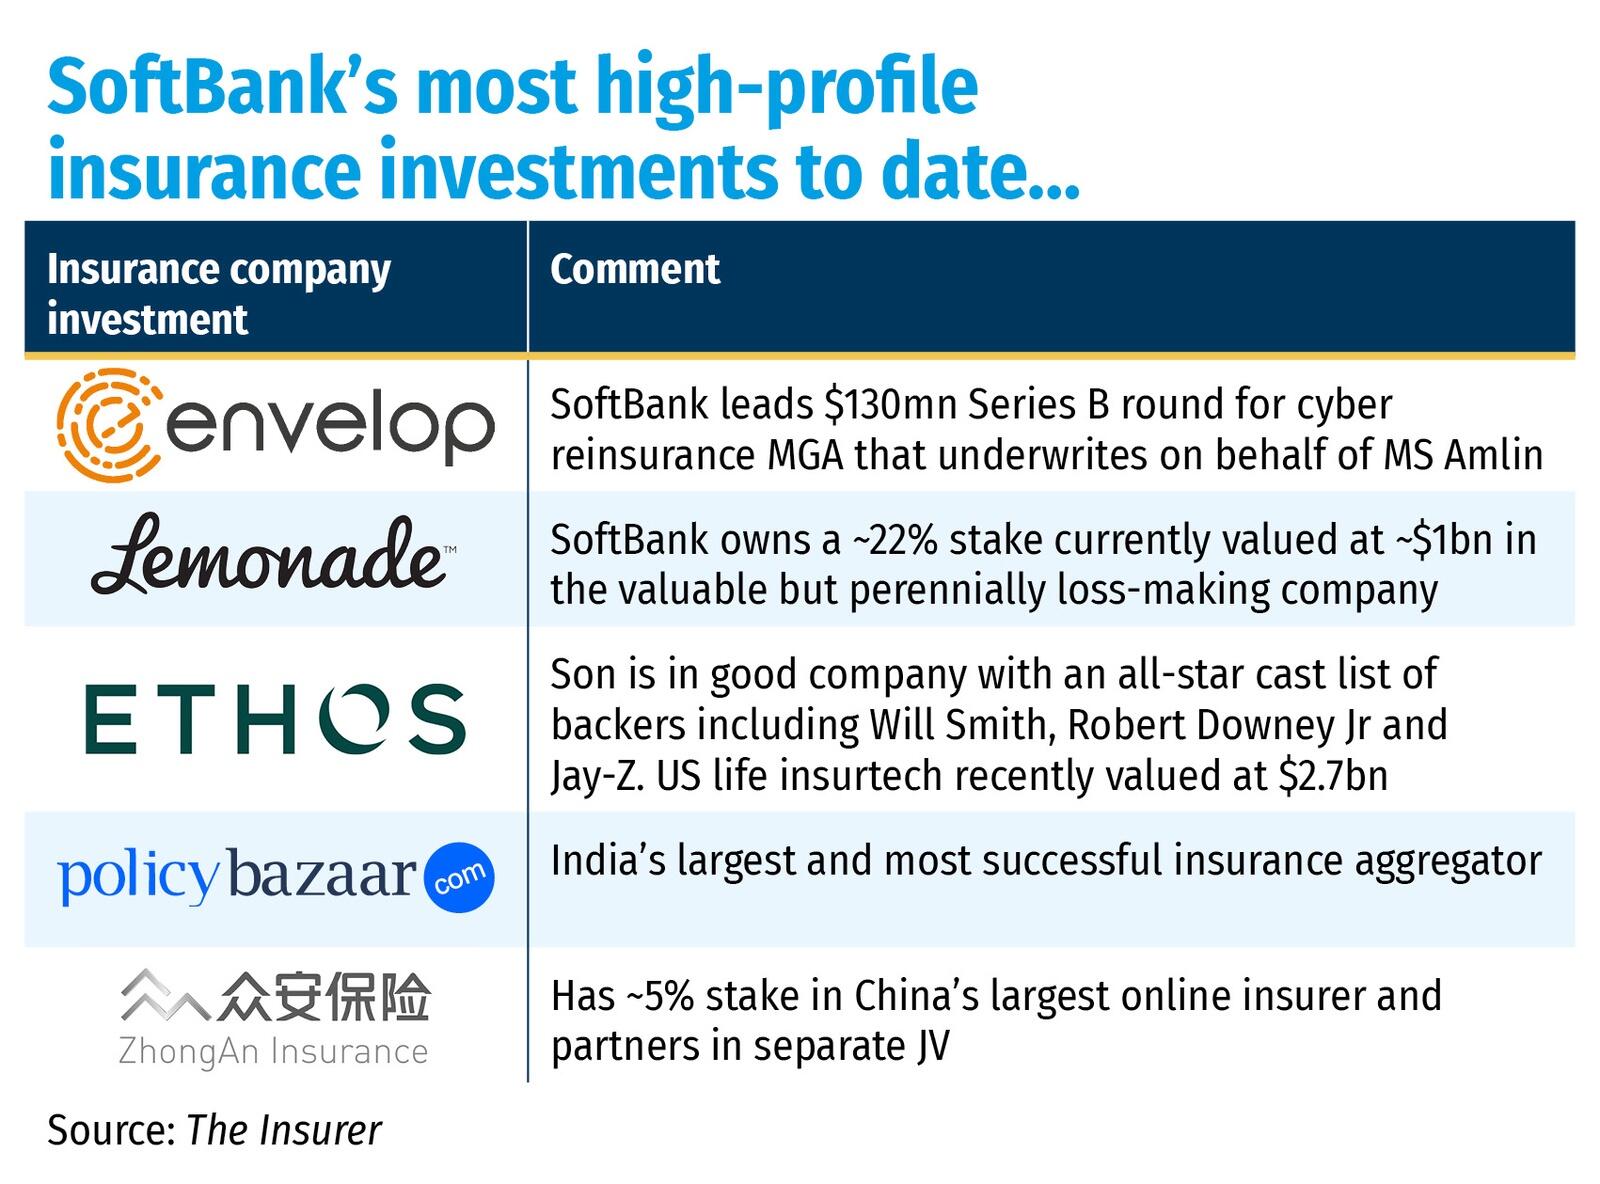 SoftBank insurance investments to date